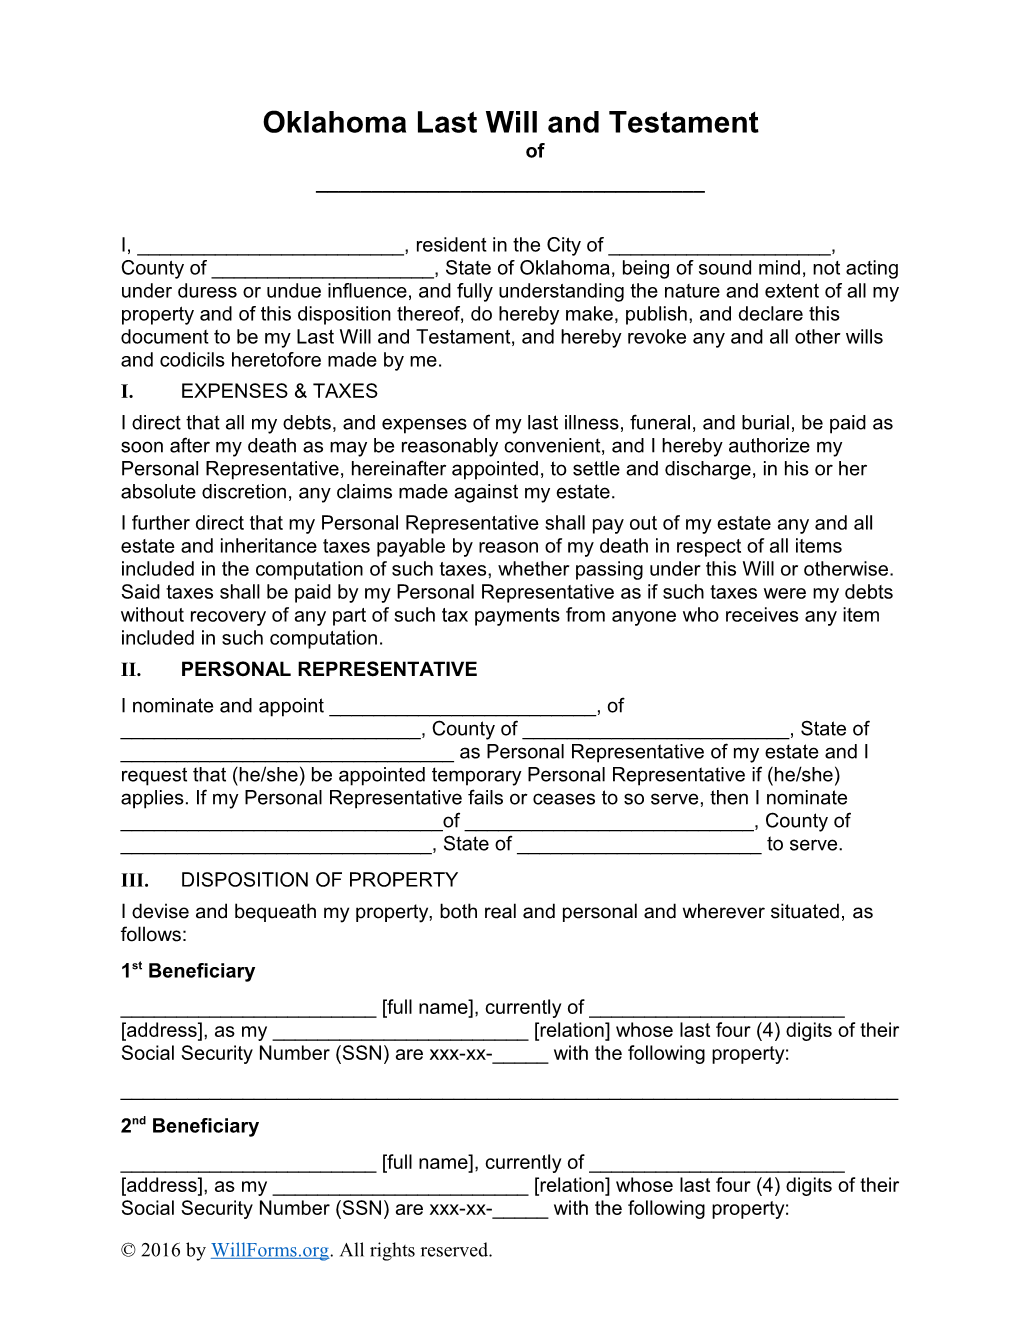 Oklahoma Last Will and Testament Form